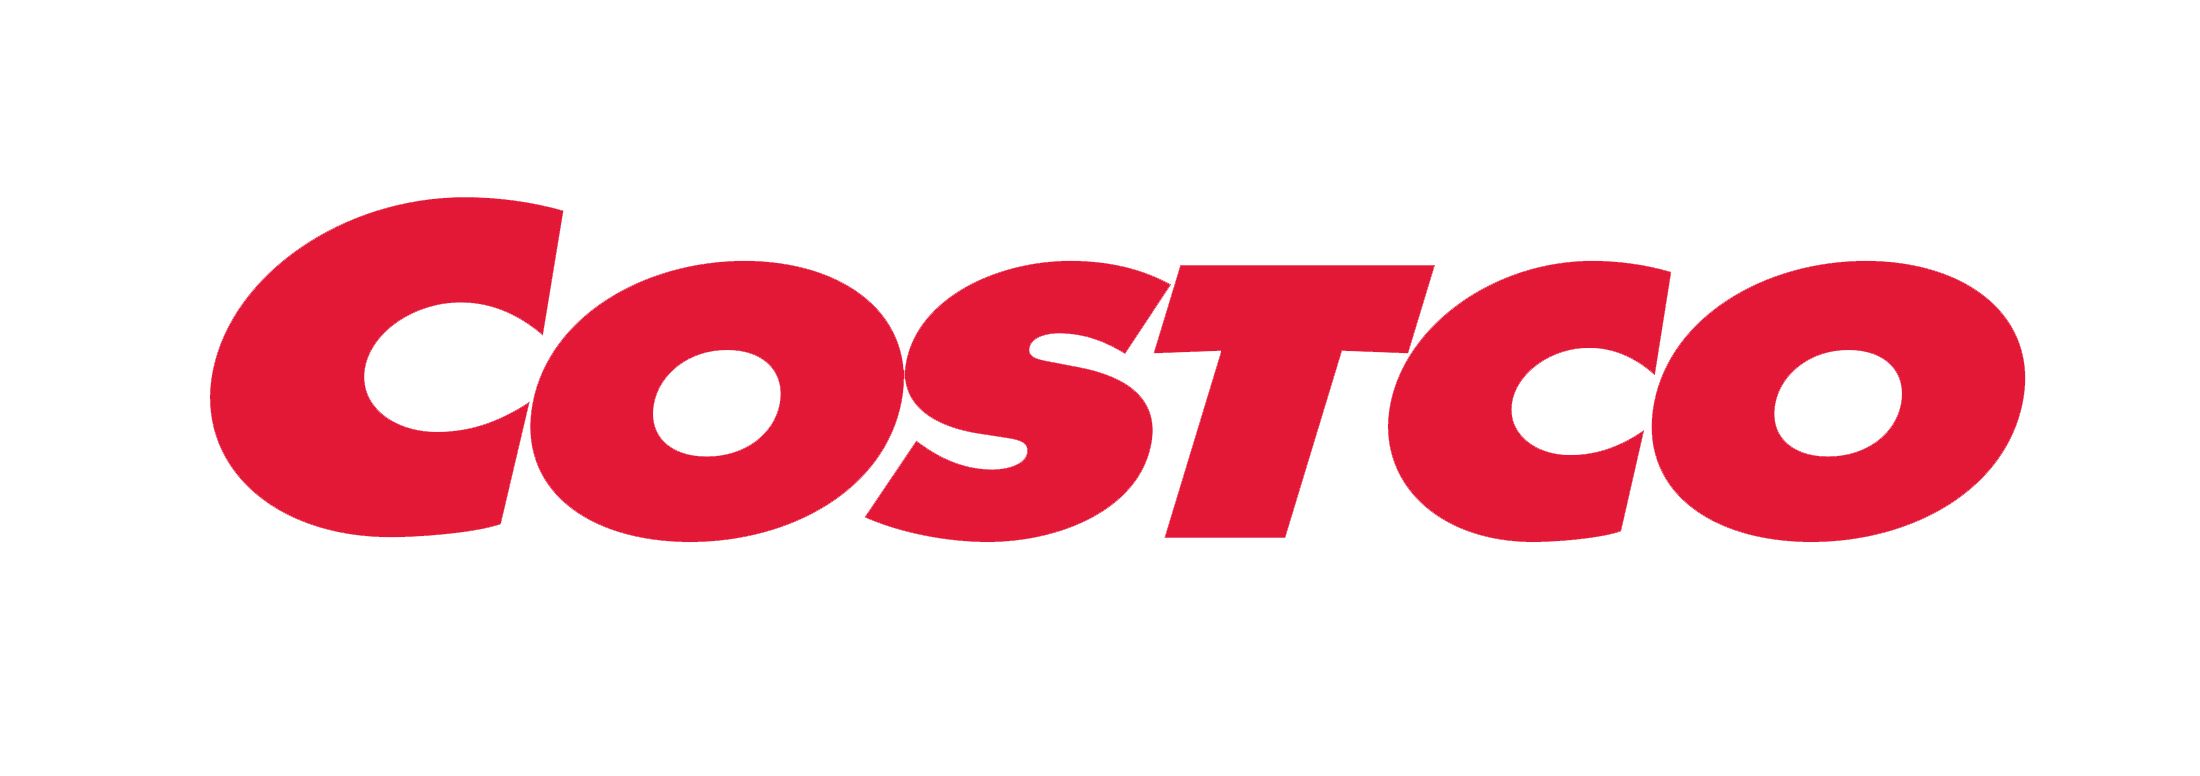 costco logo clipart transparent 10 free Cliparts | Download images on